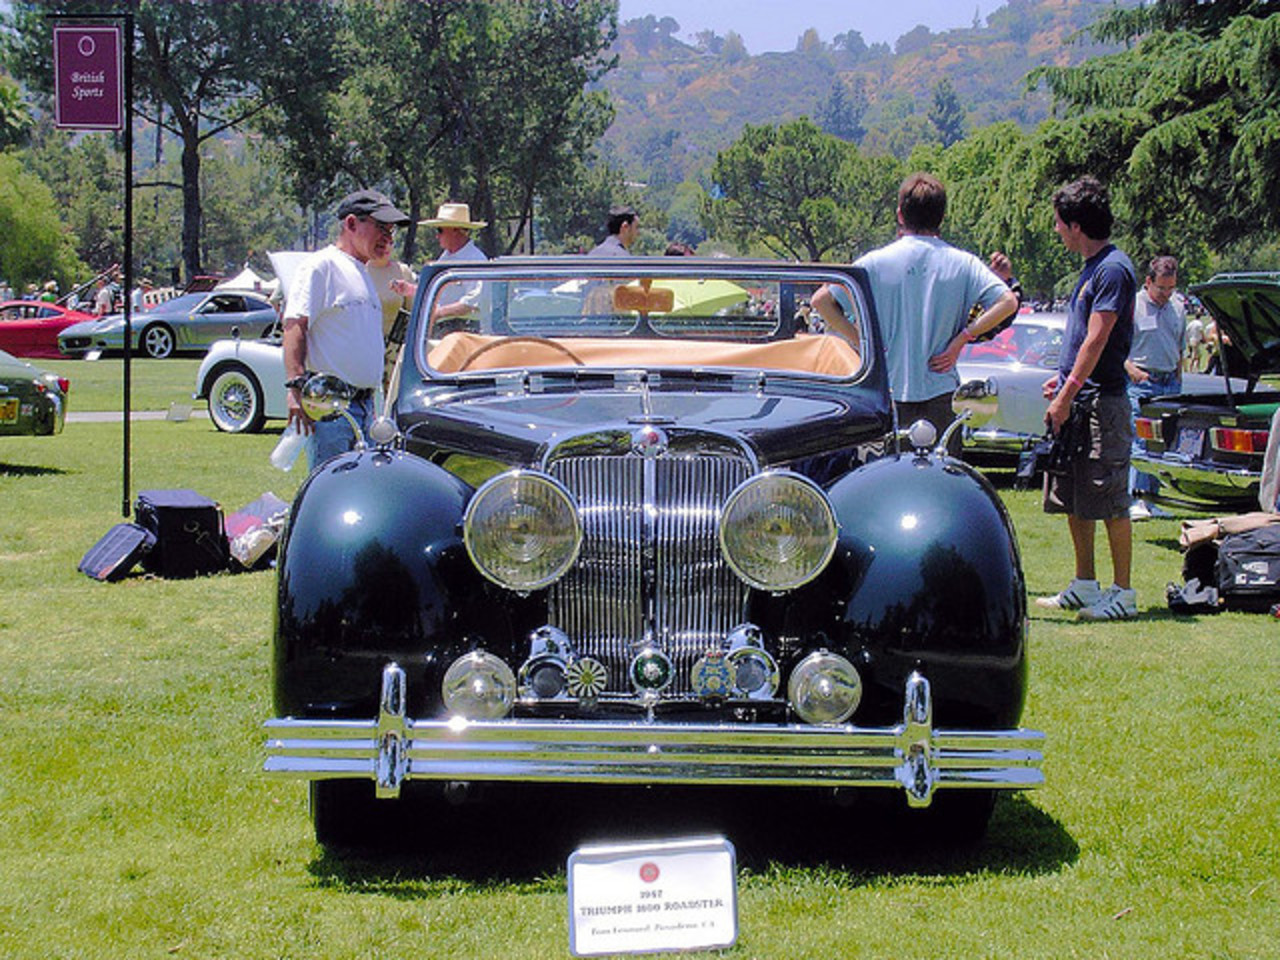 1947 Triumph 1800 Roadster | Flickr - Photo Sharing!